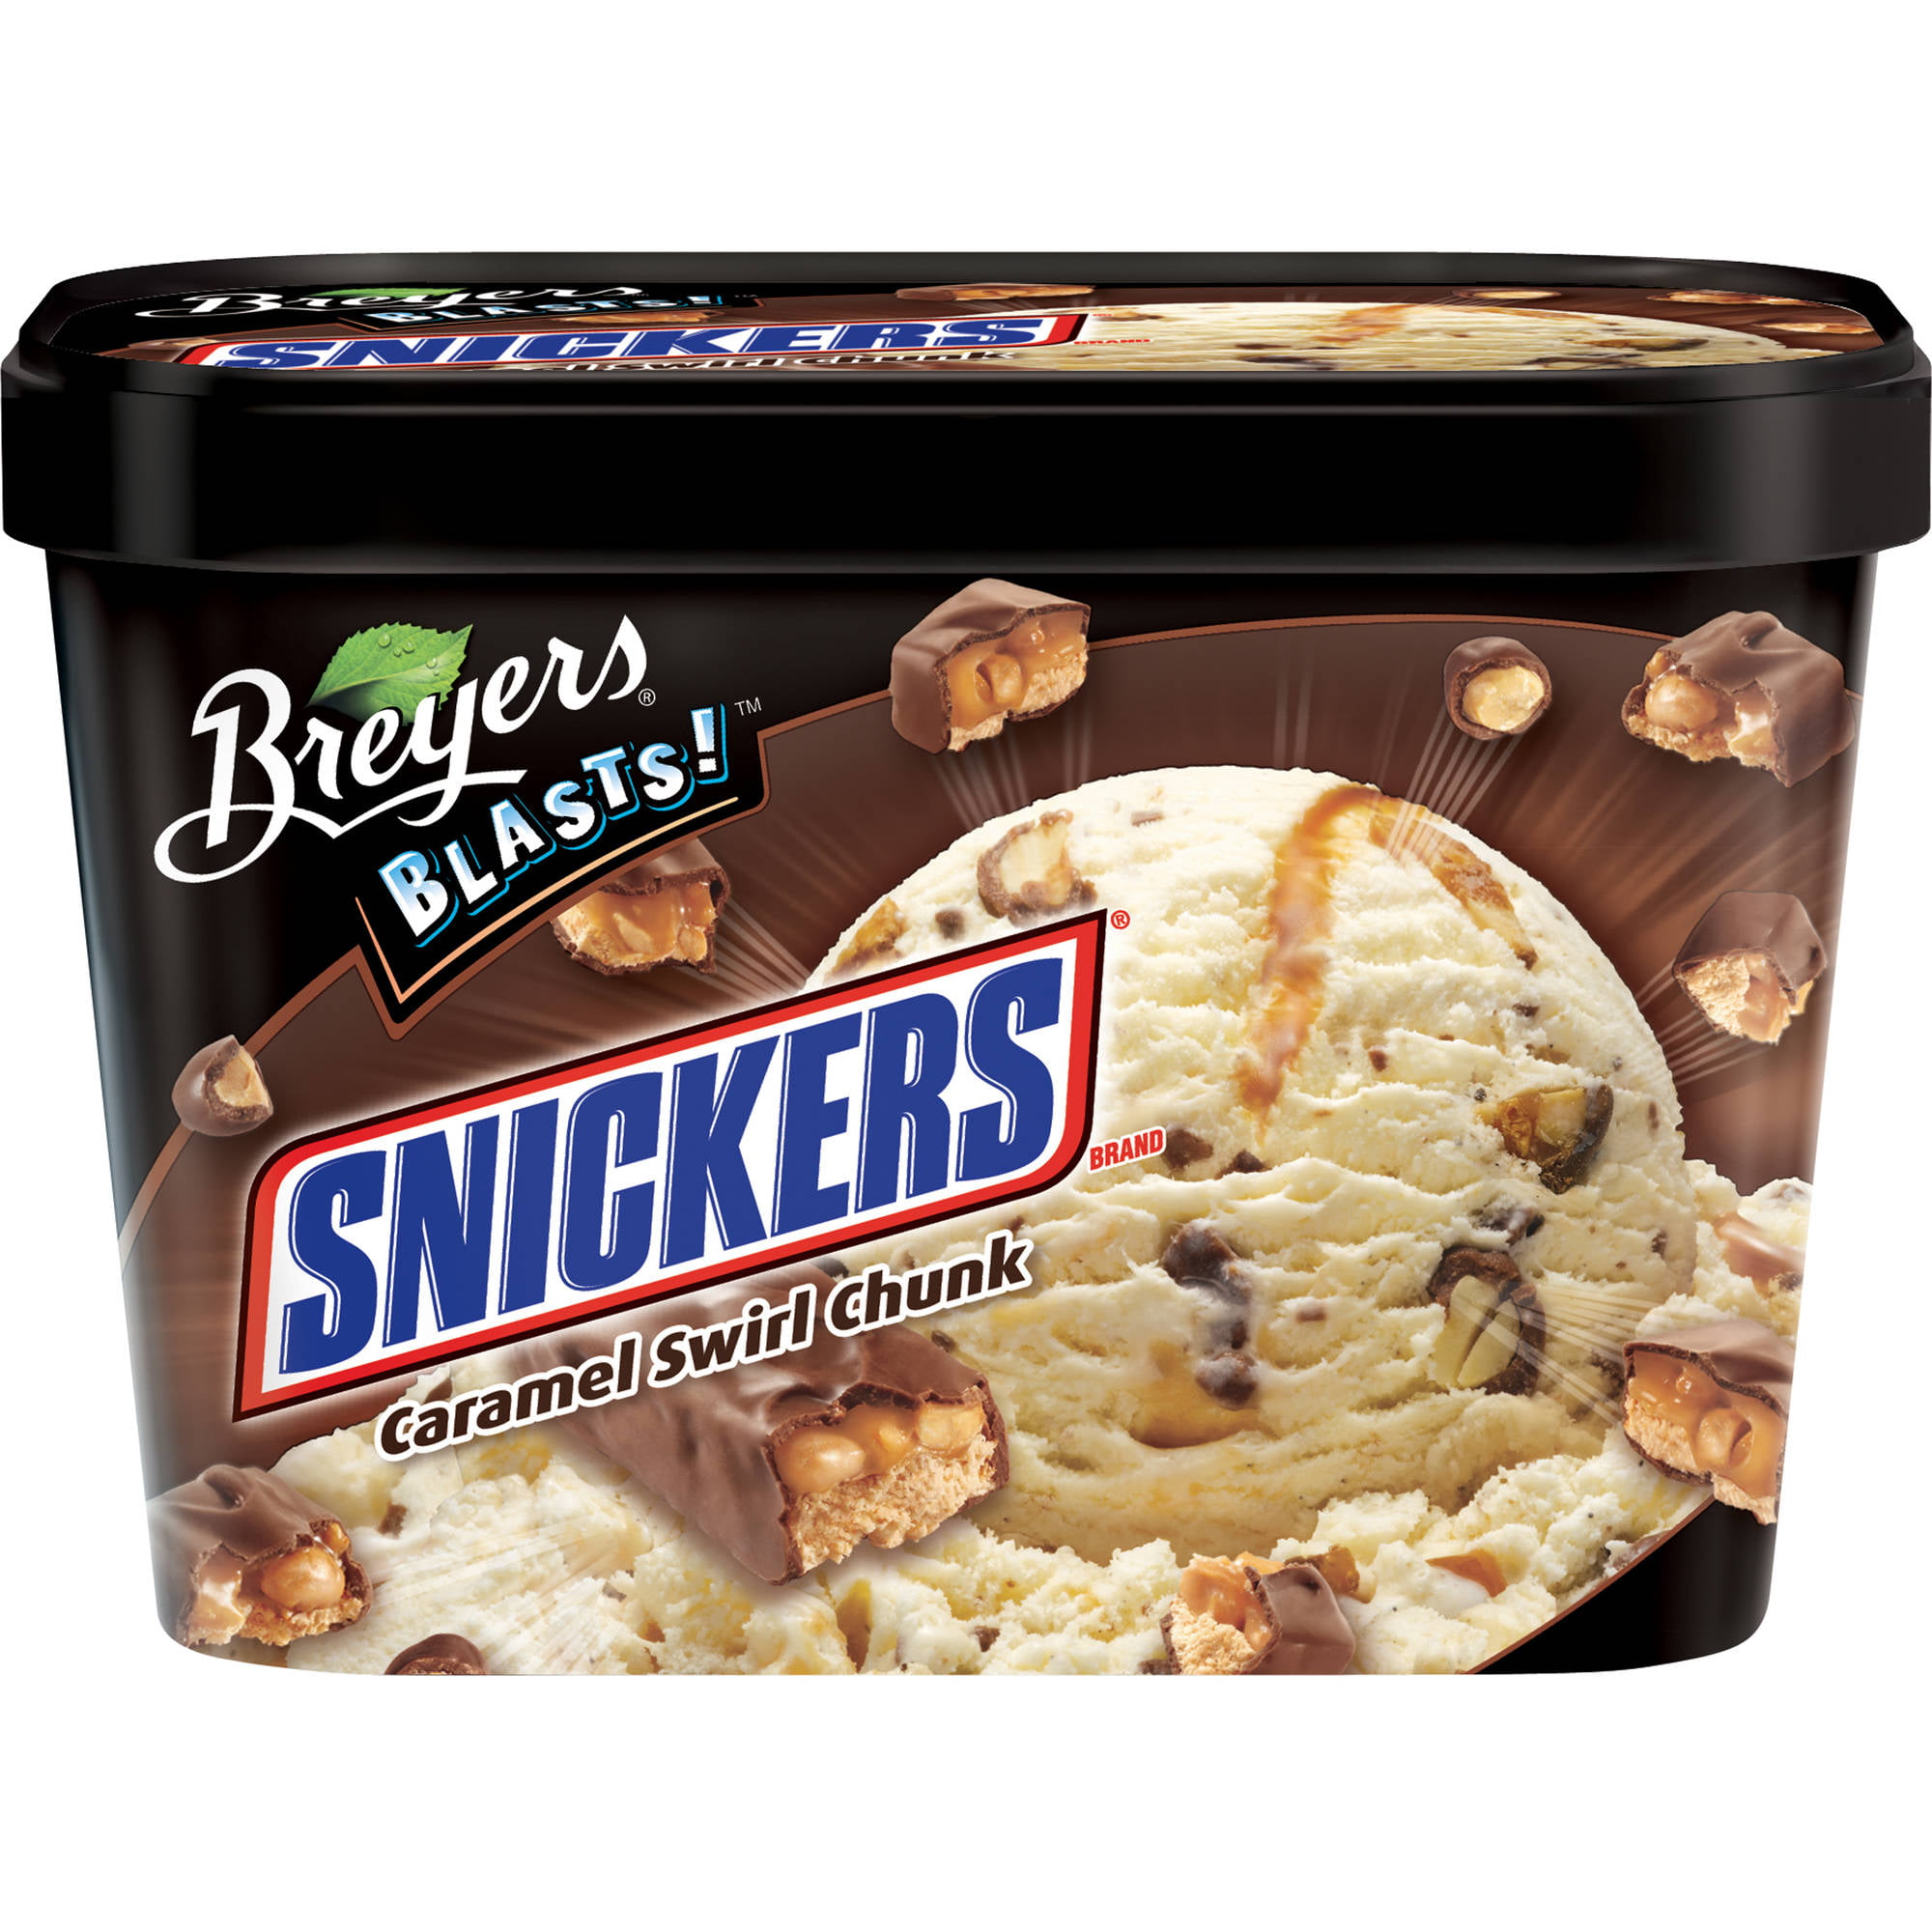 How much fat is there in Breyers ice cream?